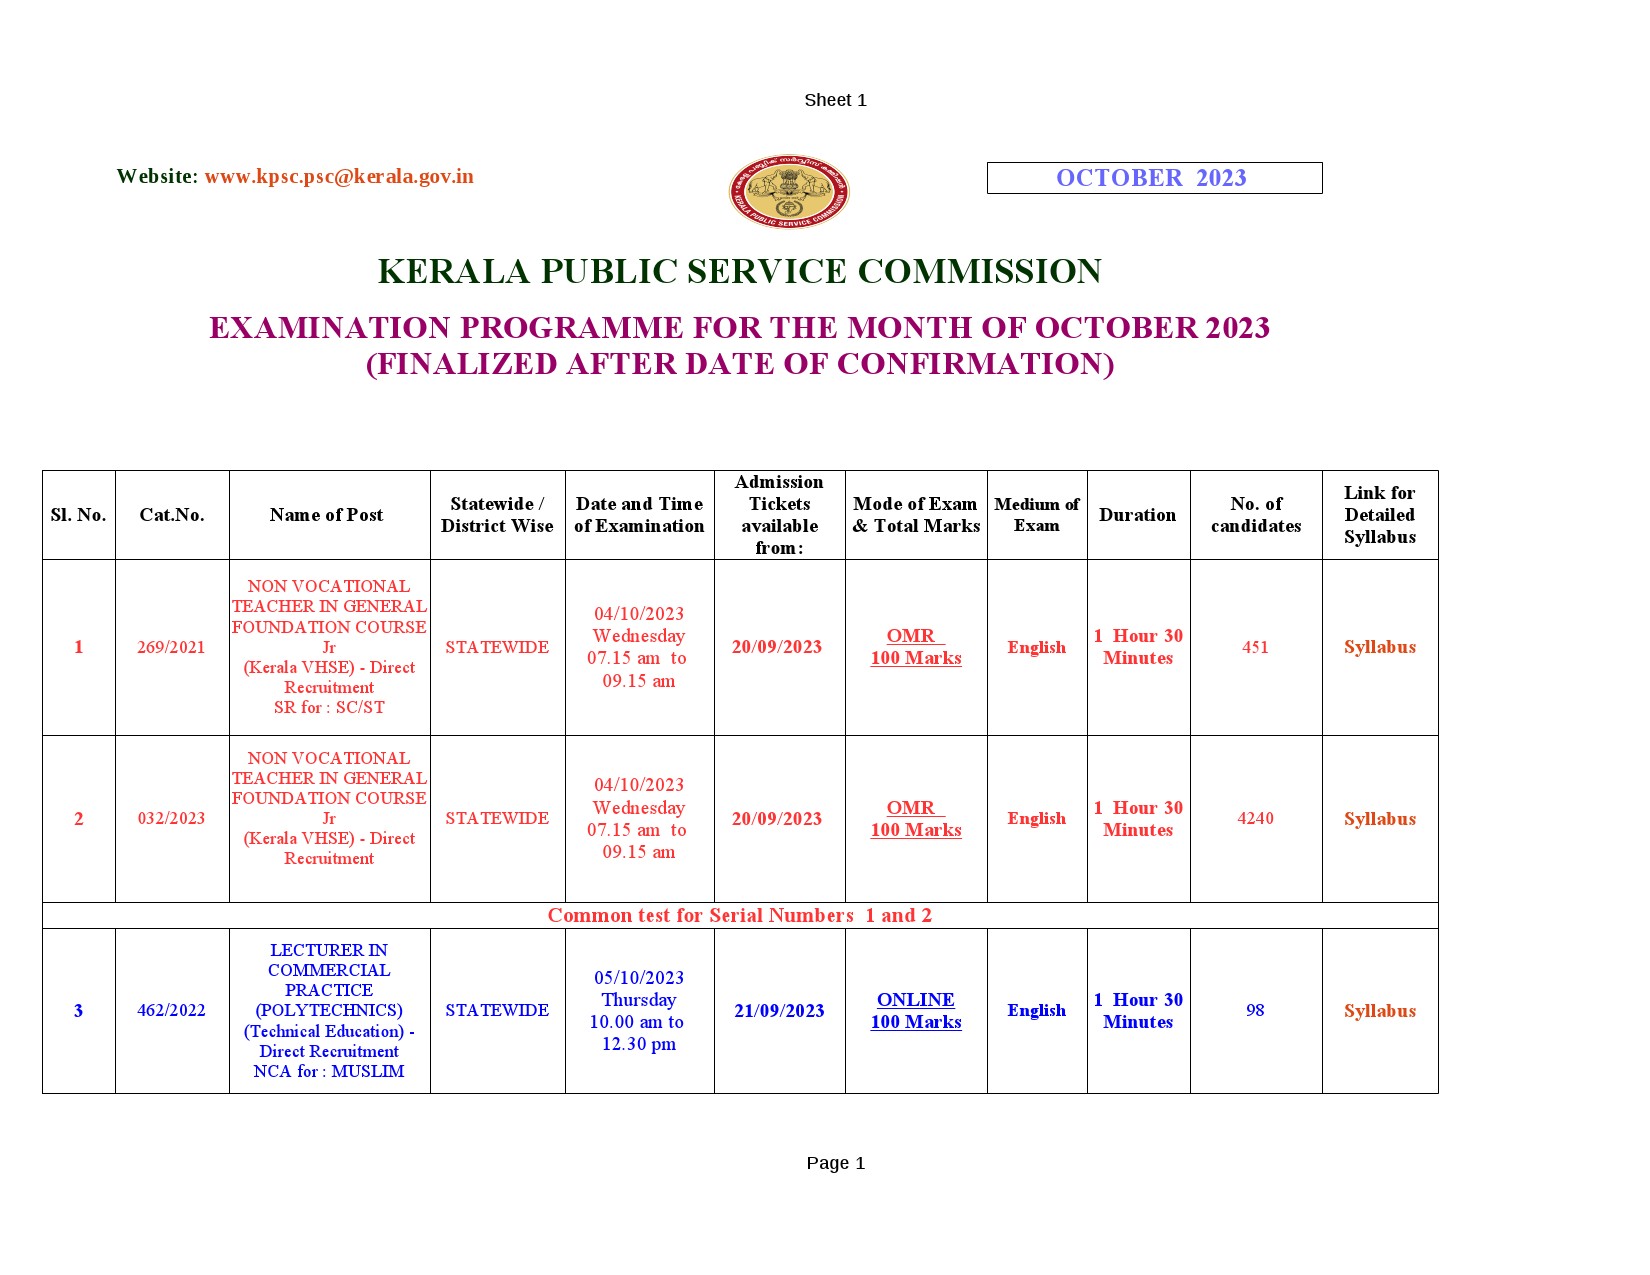 EXAMINATION PROGRAMME FOR THE MONTH OF OCTOBER 2023 - Notification Image 1